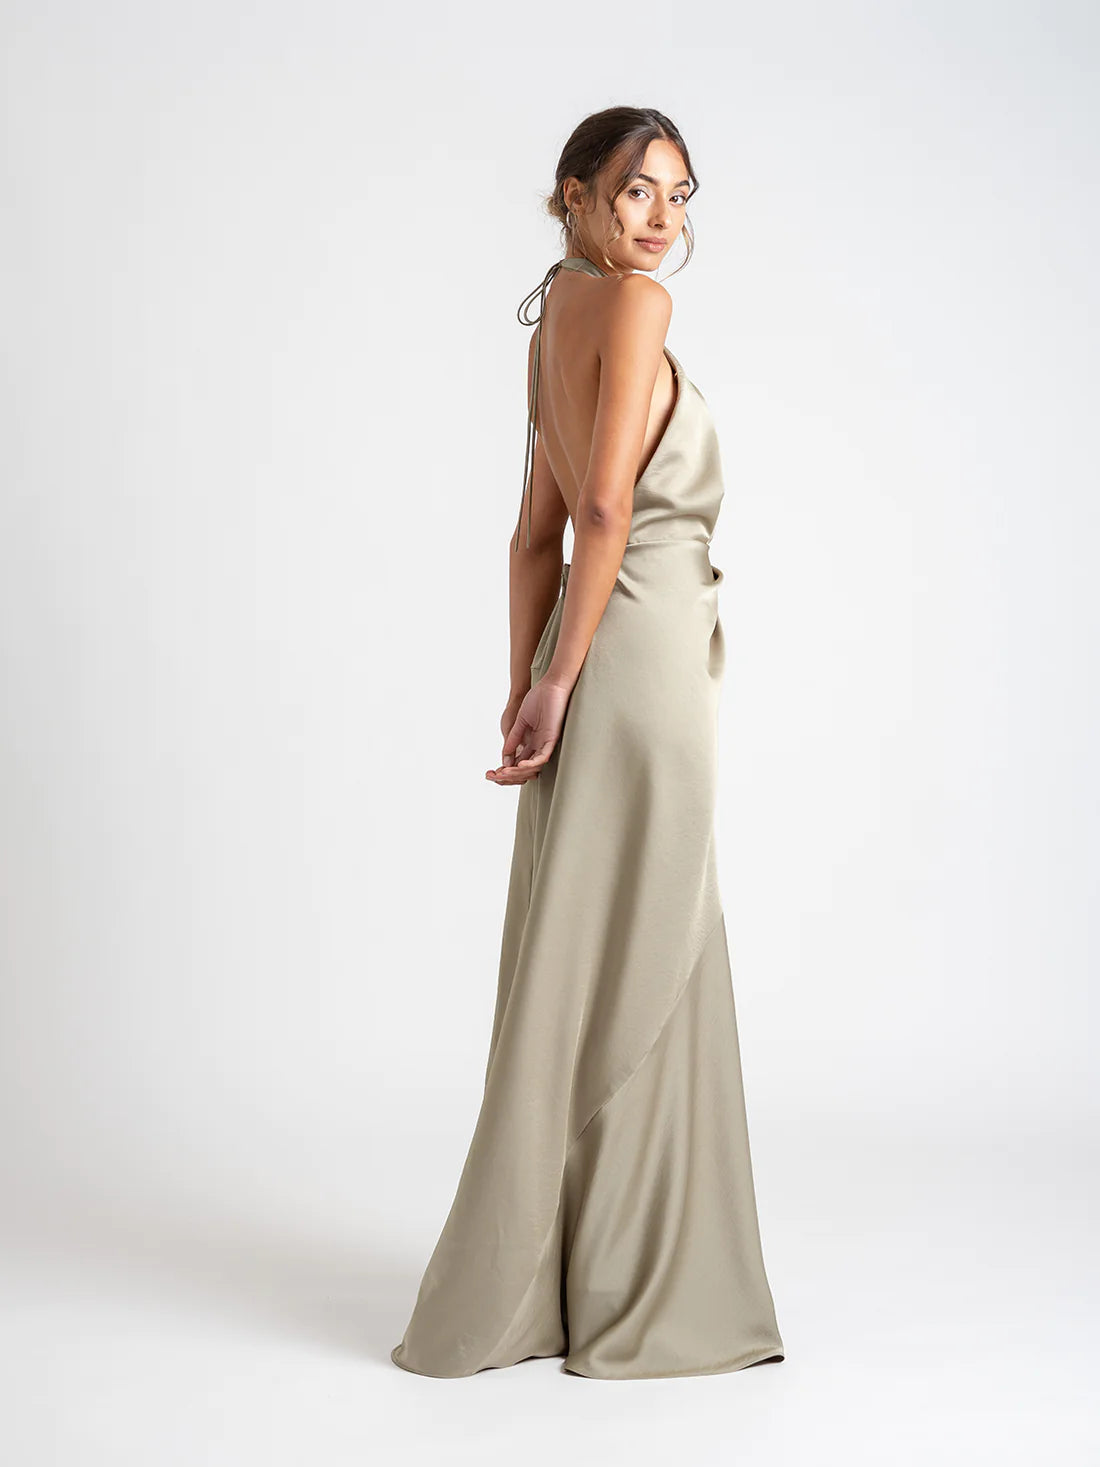 One Fell Swoop Zion Maxi, Serpent